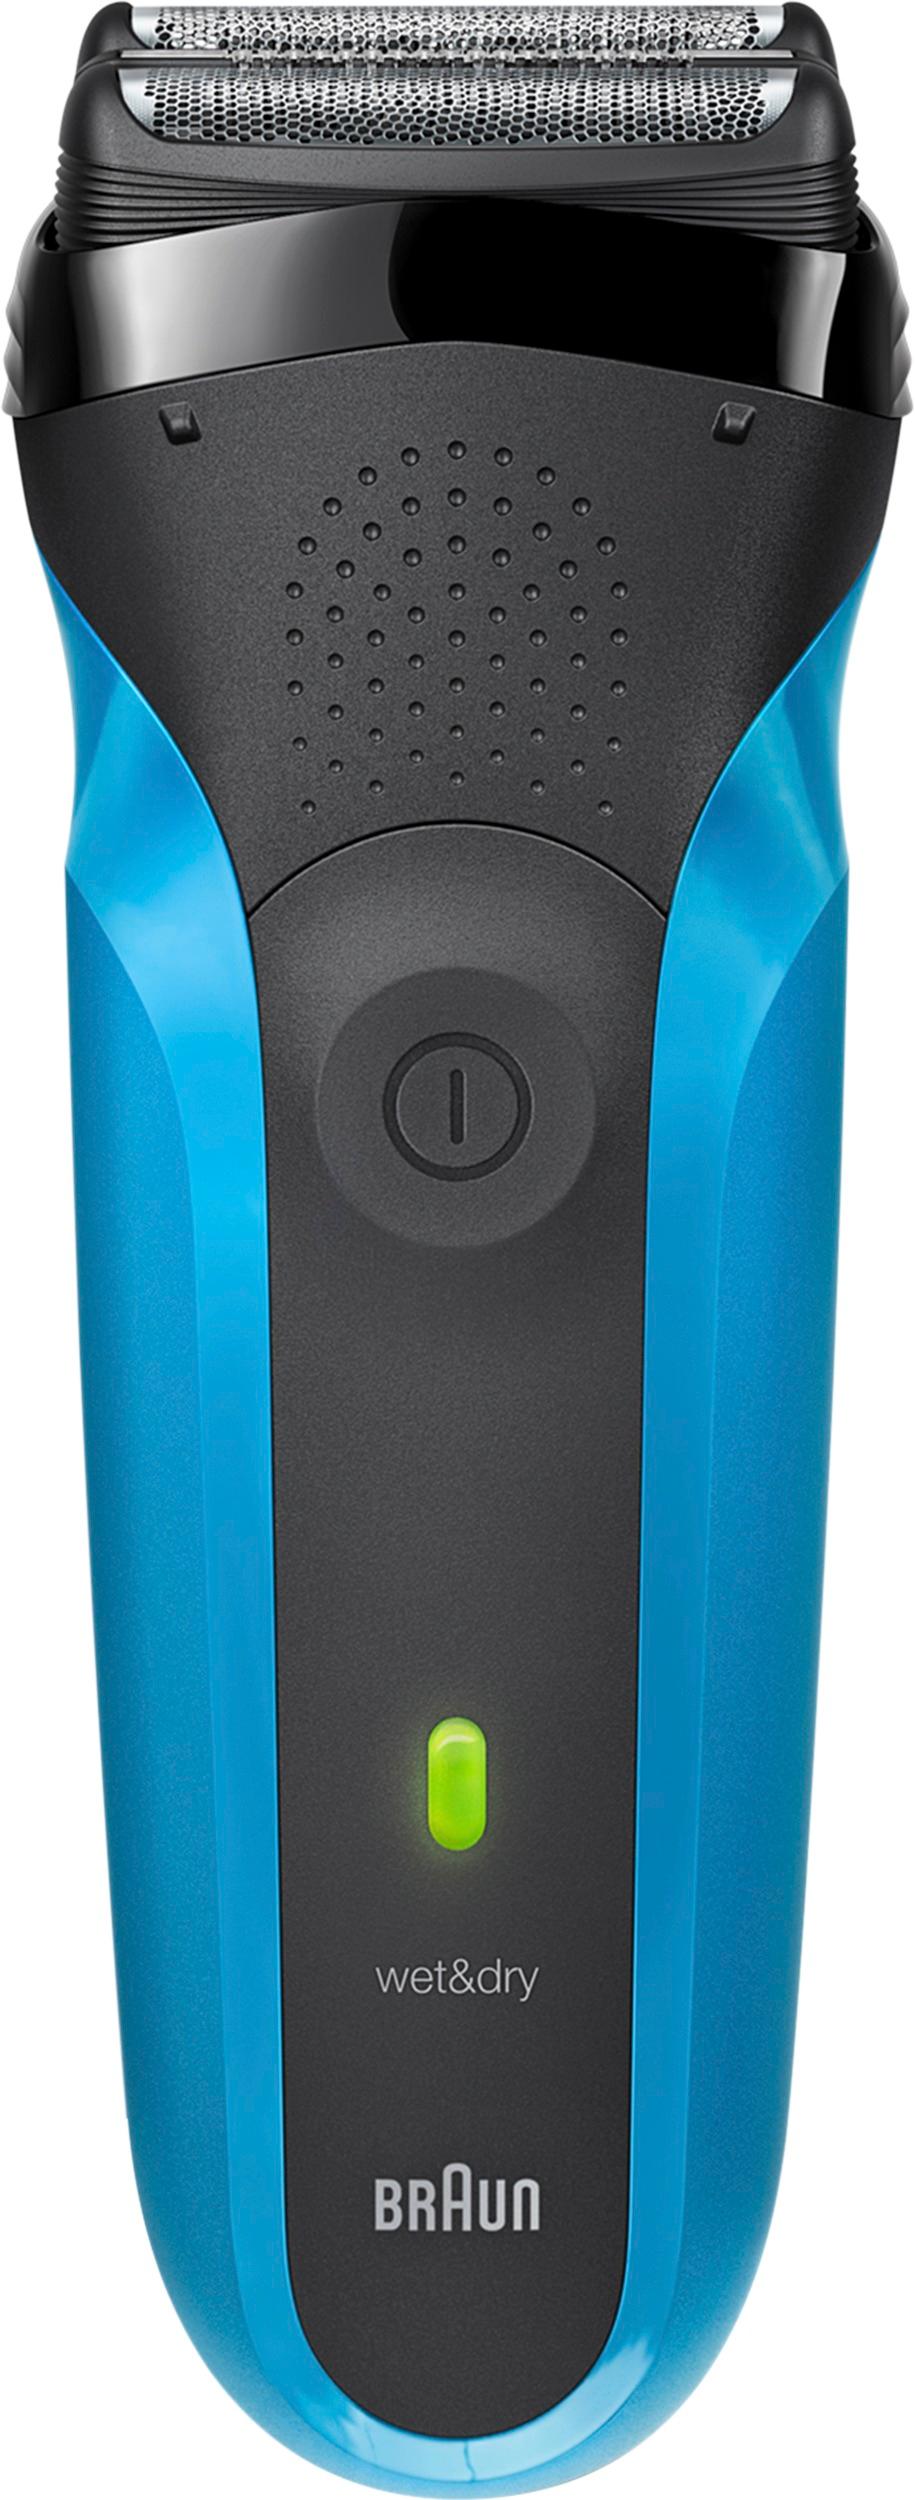 Best Buy: Braun Series 3 Wet/Dry Electric Shaver Blue 310S